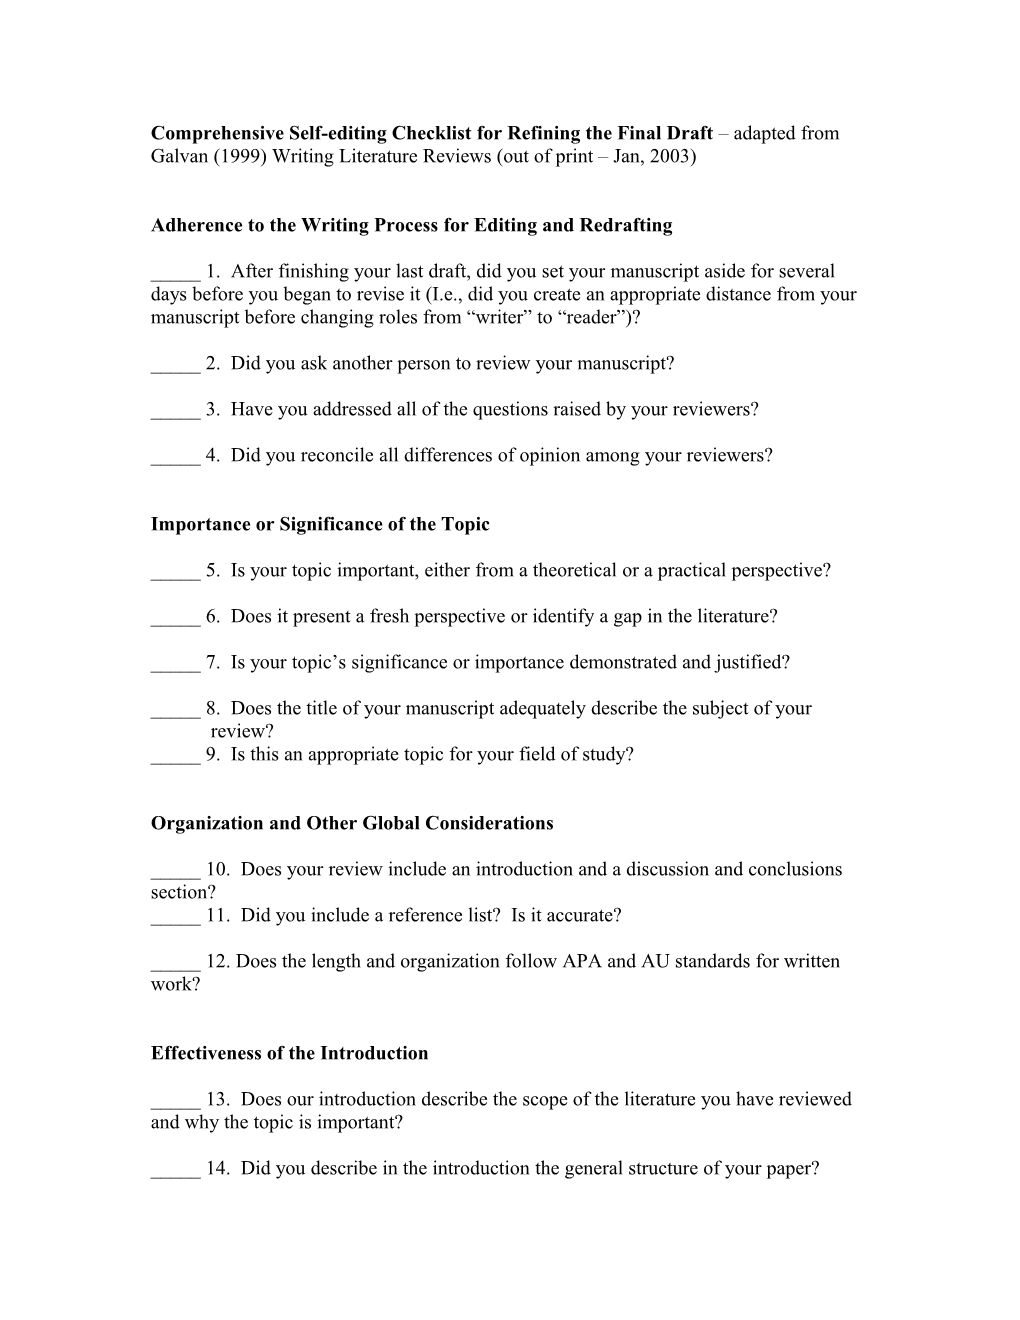 Comprehensive Self-Editing Checklist for Refining the Final Draft Adapted from Galvan (1999)